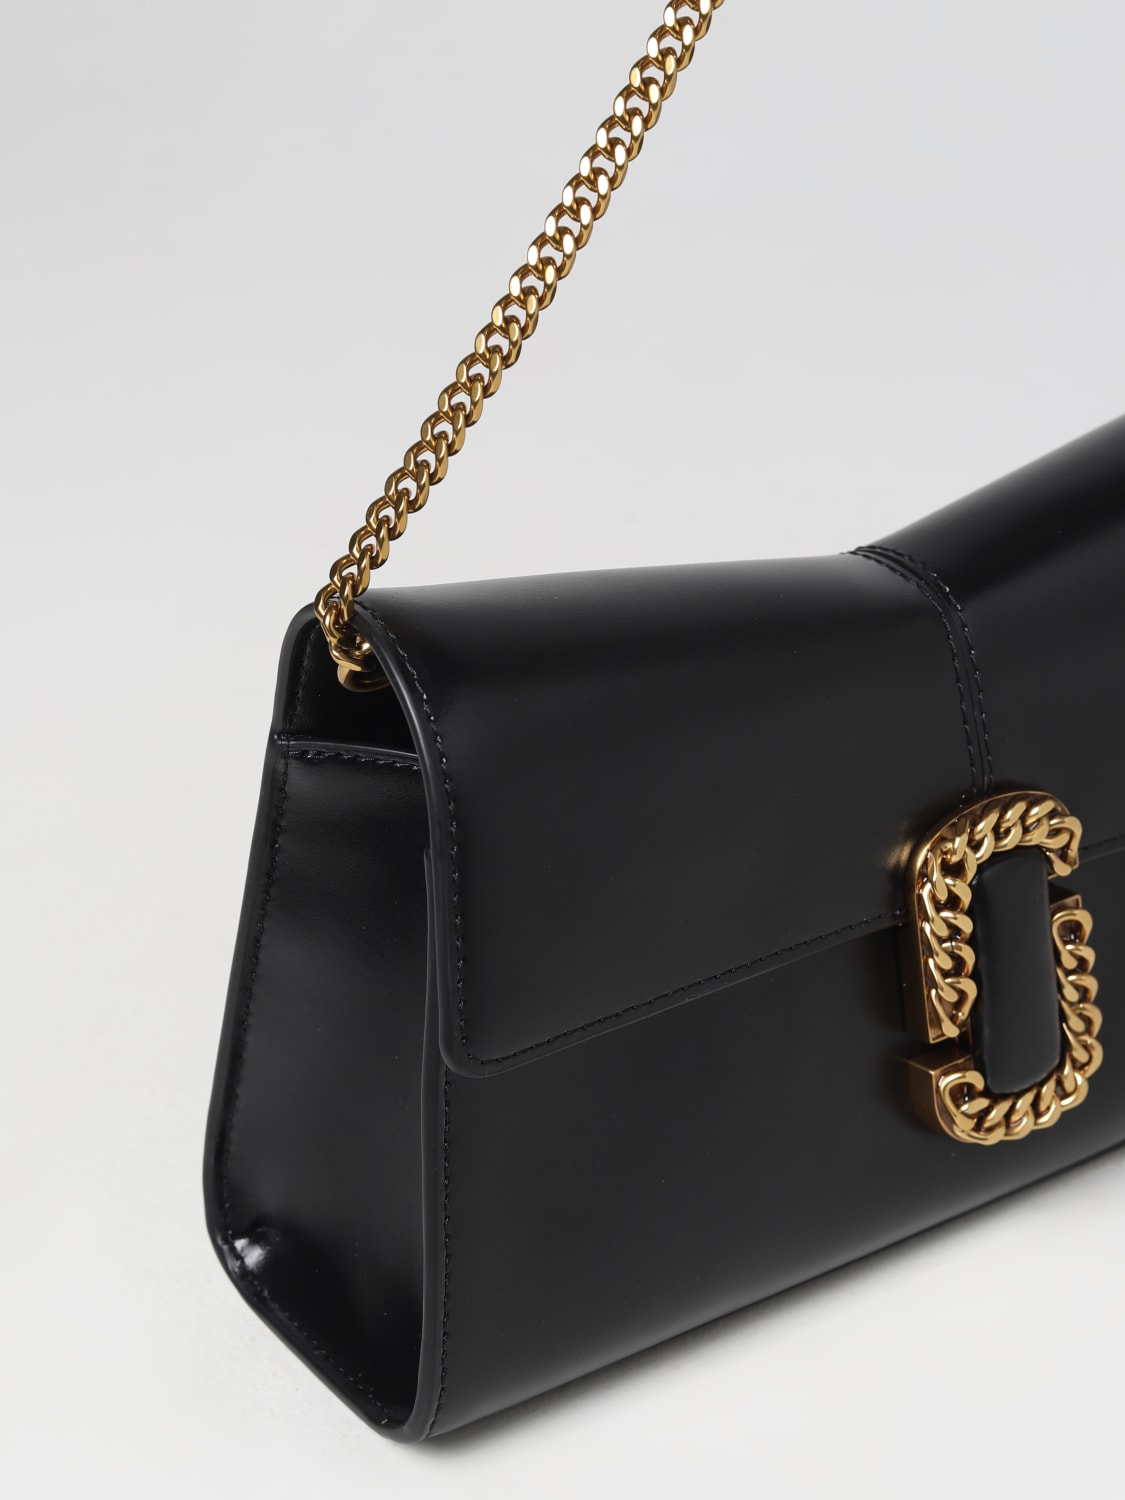 Marc Jacobs Black Leather The Vanity Clutch at FORZIERI